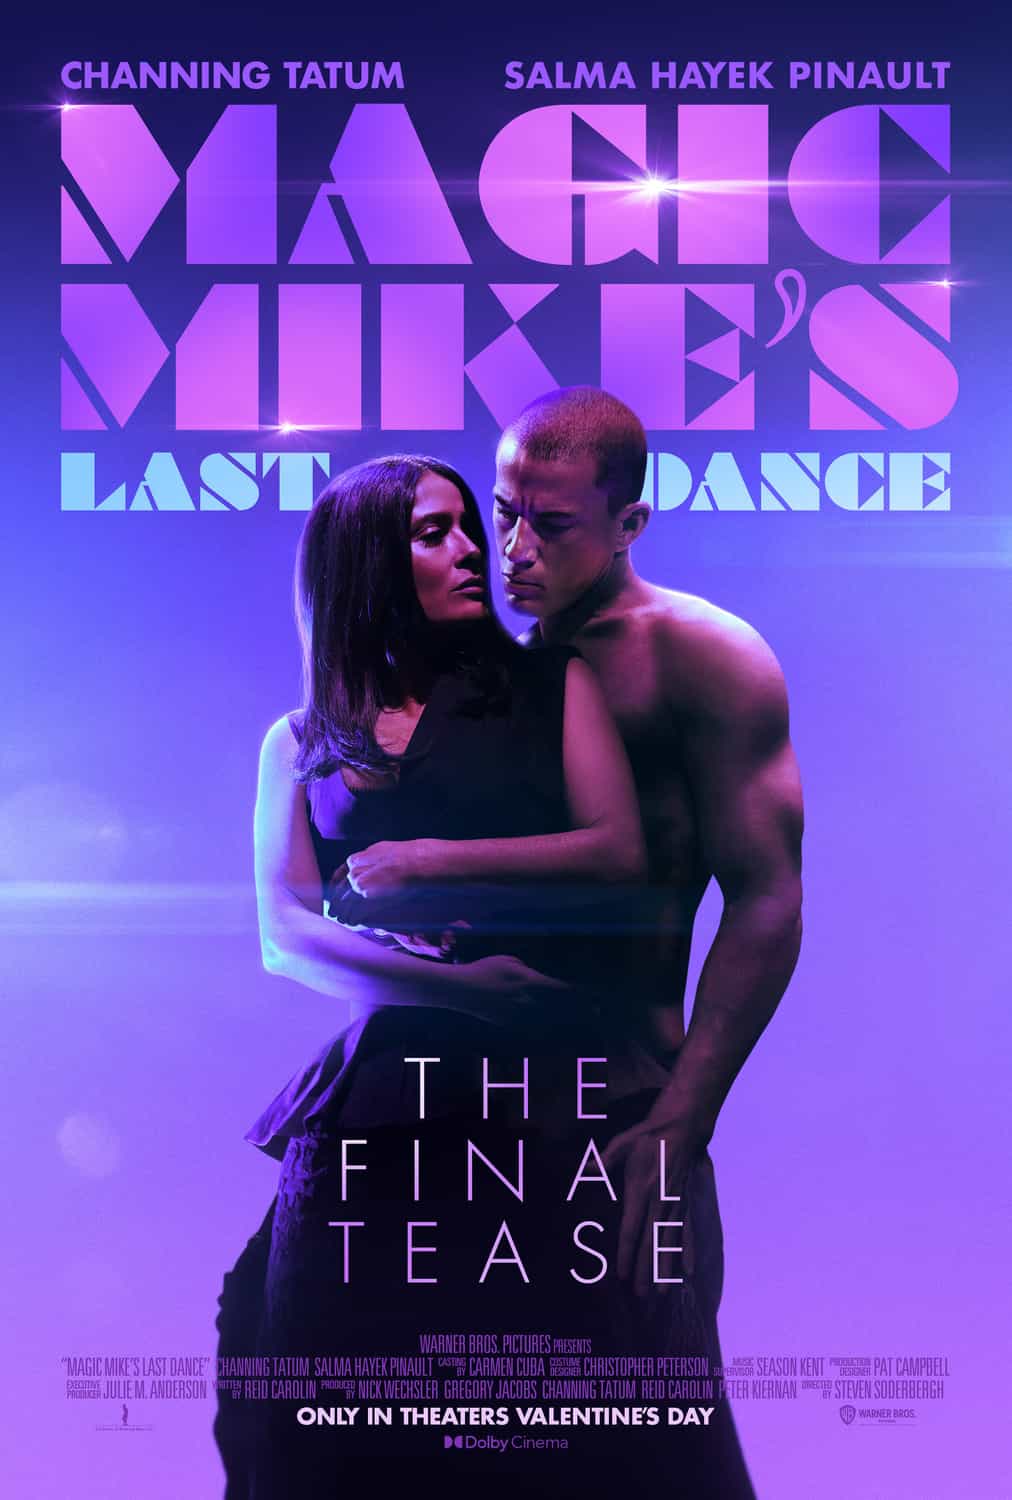 Magic Mikes Last Dance has been given a 15 age rating in the UK for strong sex references, language